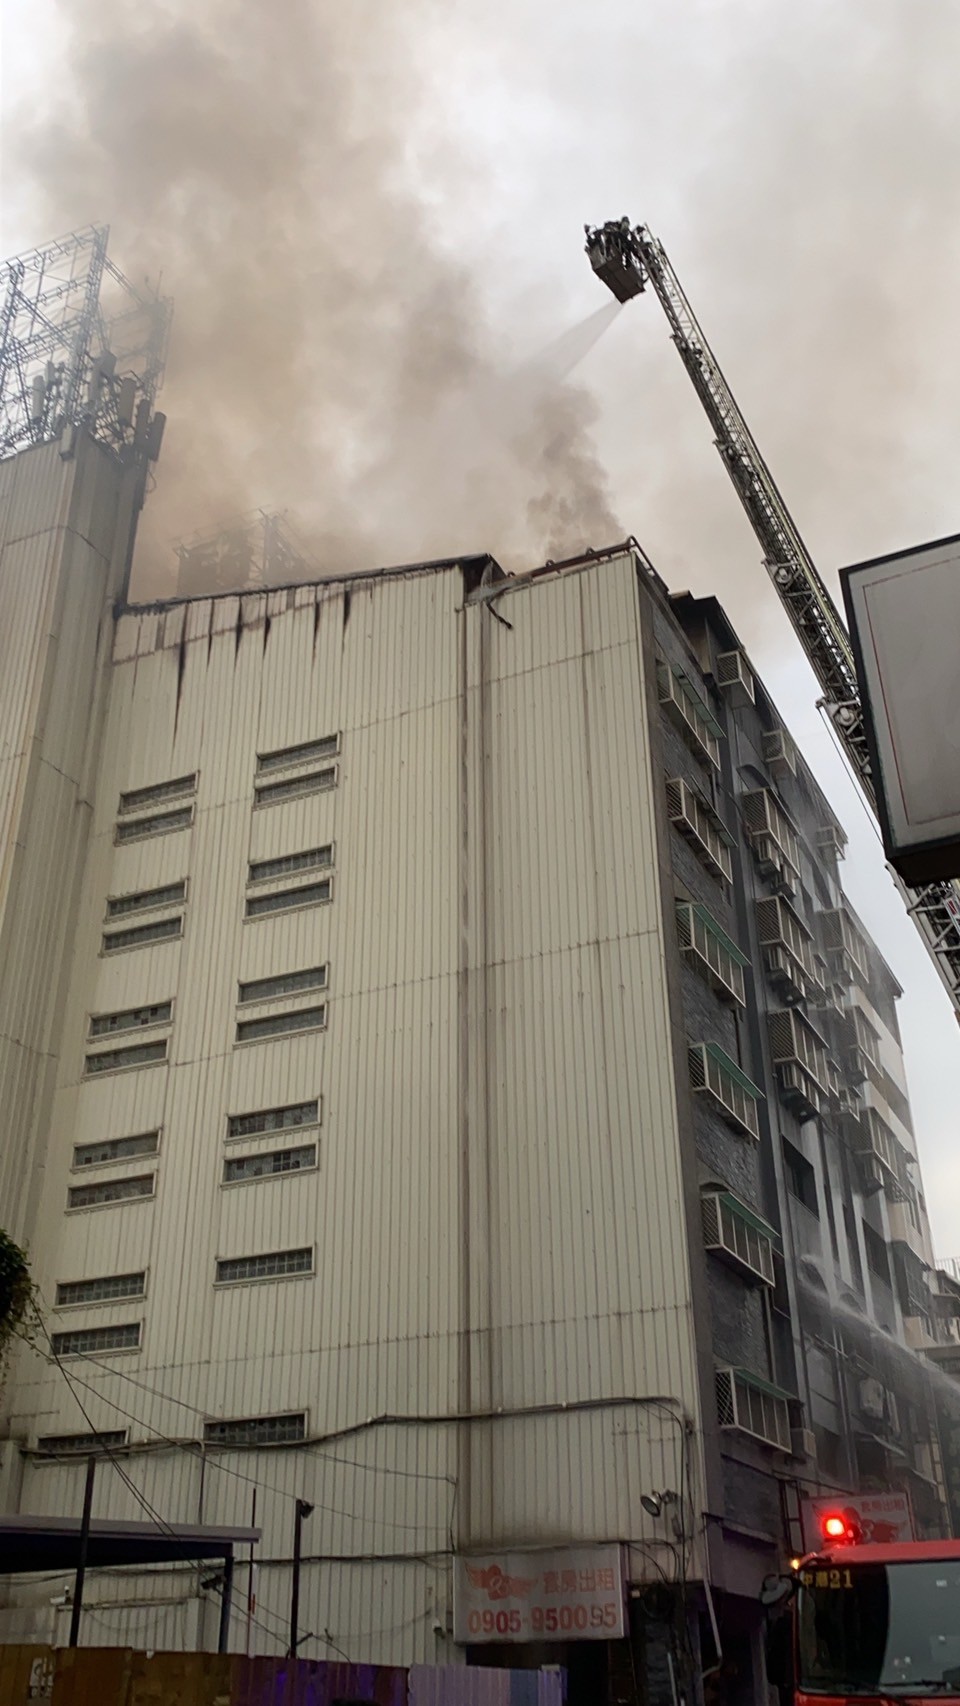 6 dead, 6 injured in central Taiwan apartment fire